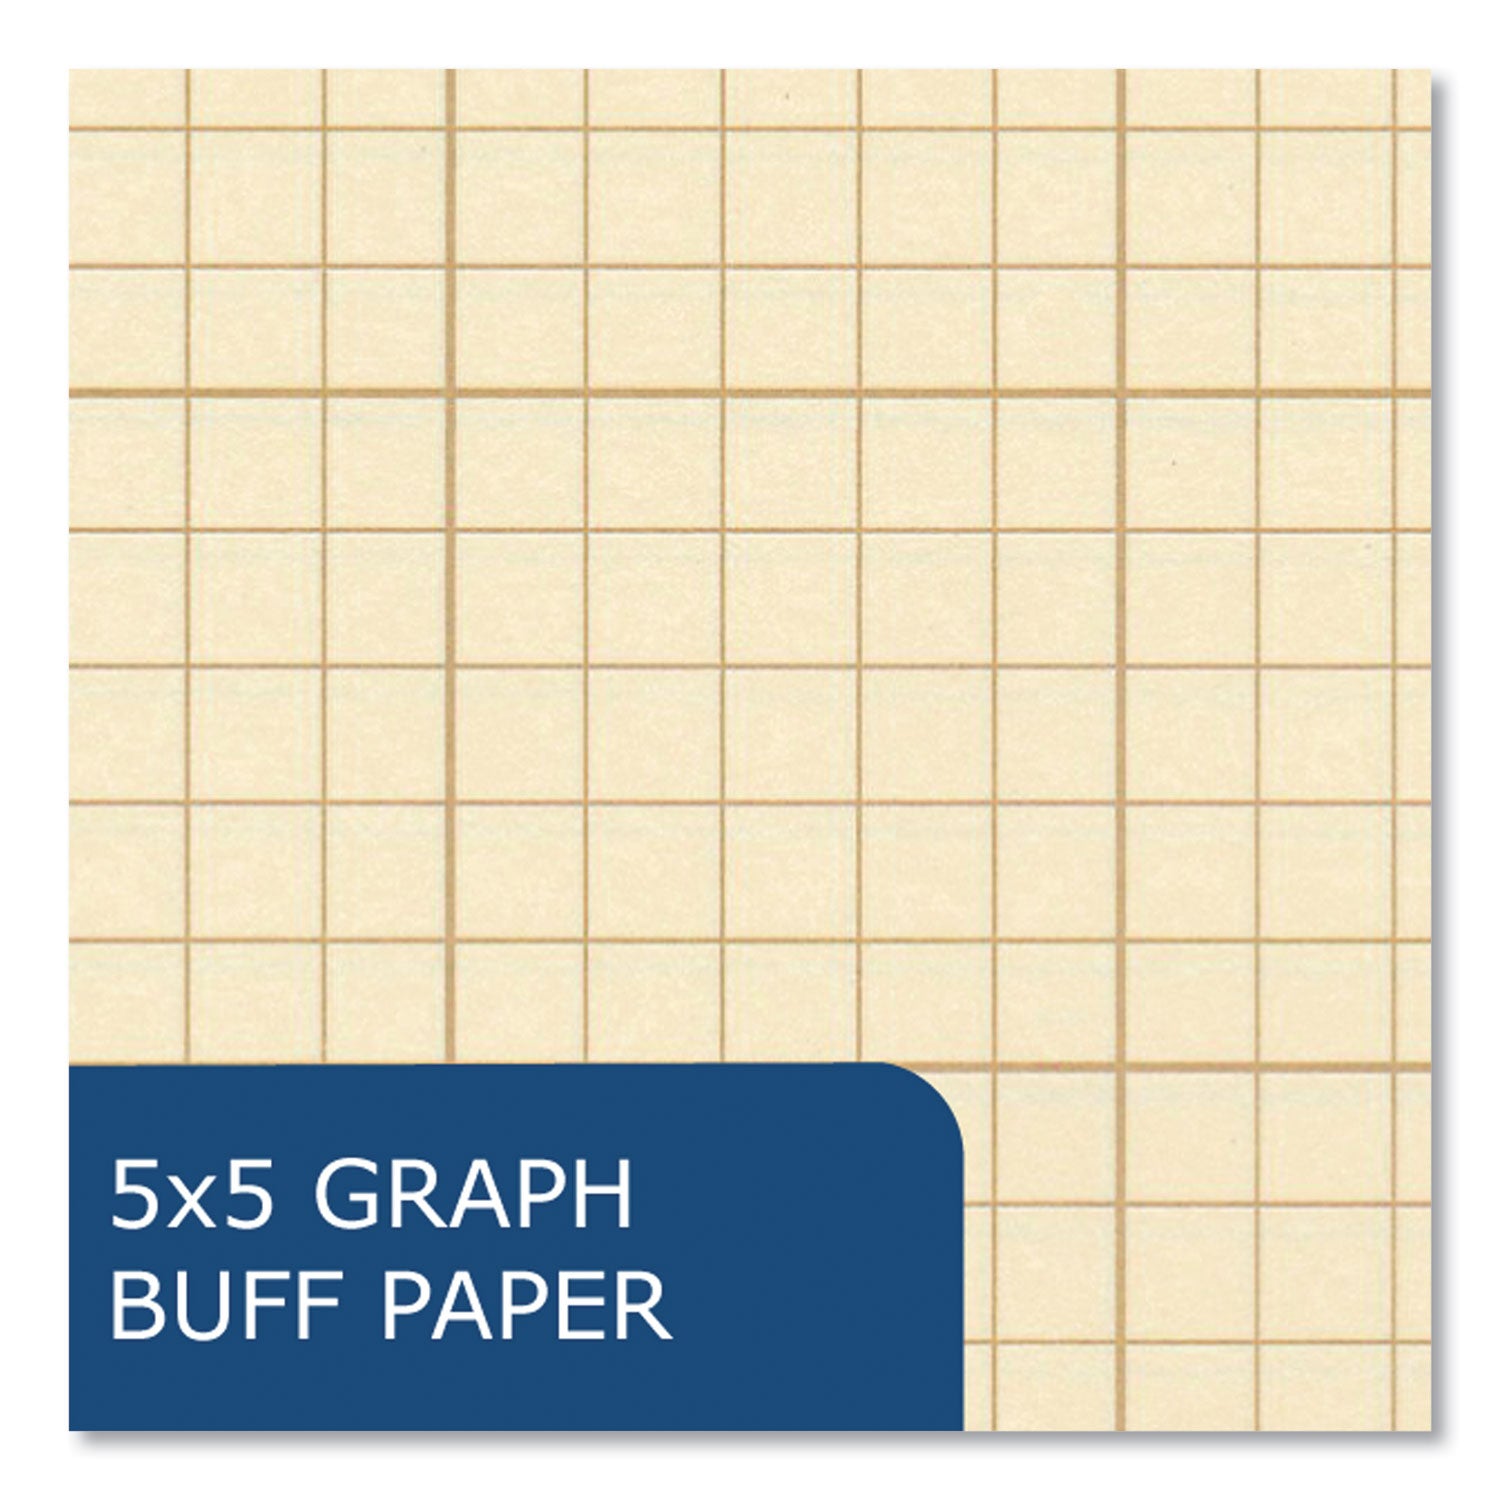 engineer-pad-quadrille-rule-5-sq-in-100-buff-85-x-11-sheets-24-carton-ships-in-4-6-business-days_roa95182cs - 5